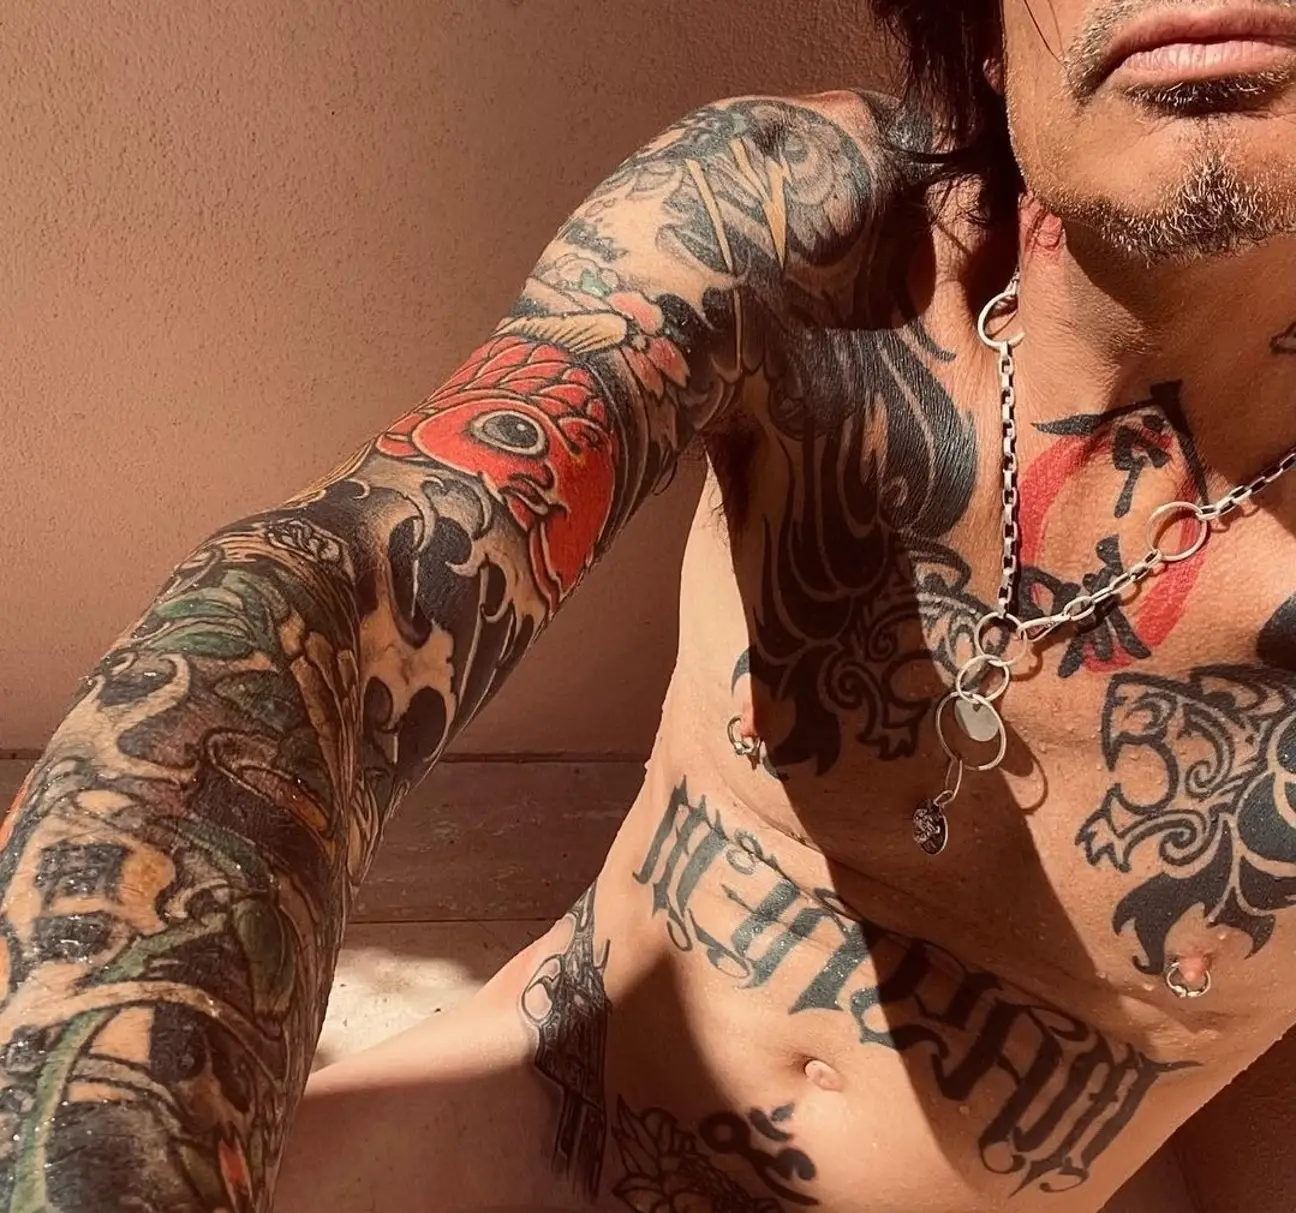 Adult content site invites Tommy Lee to join platform